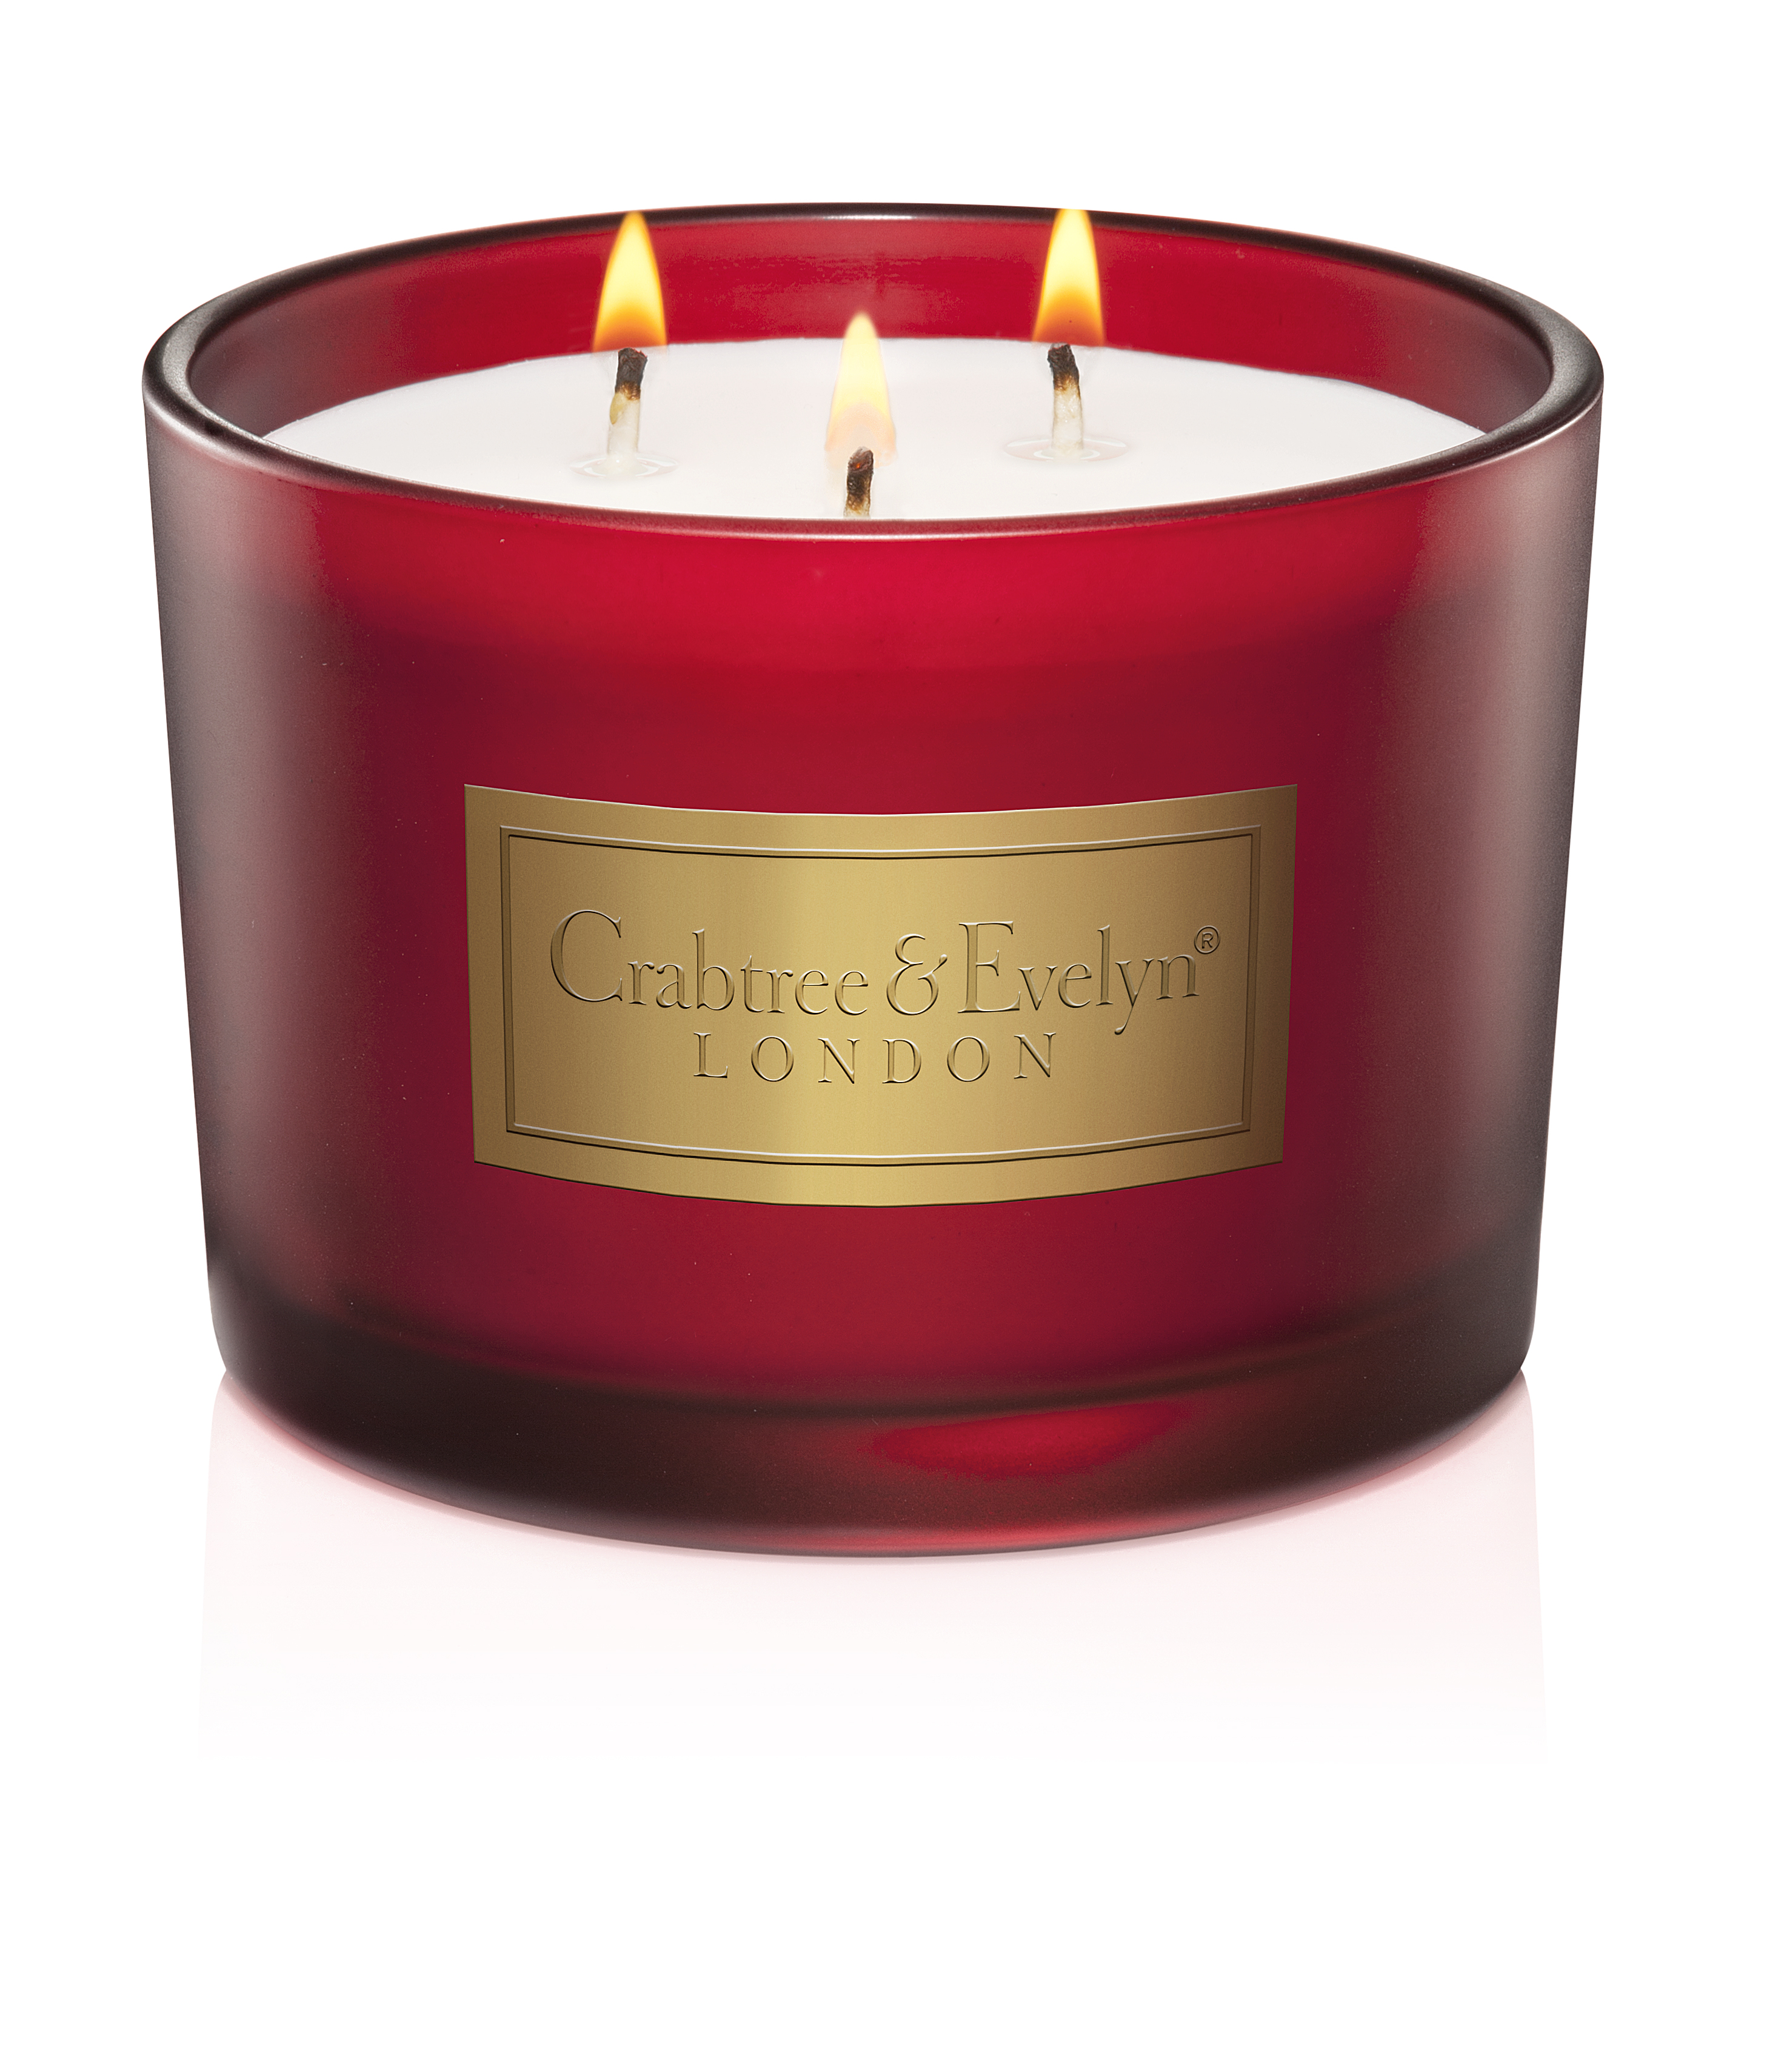 Festive special: Inside Crabtree & Evelyn this Christmas